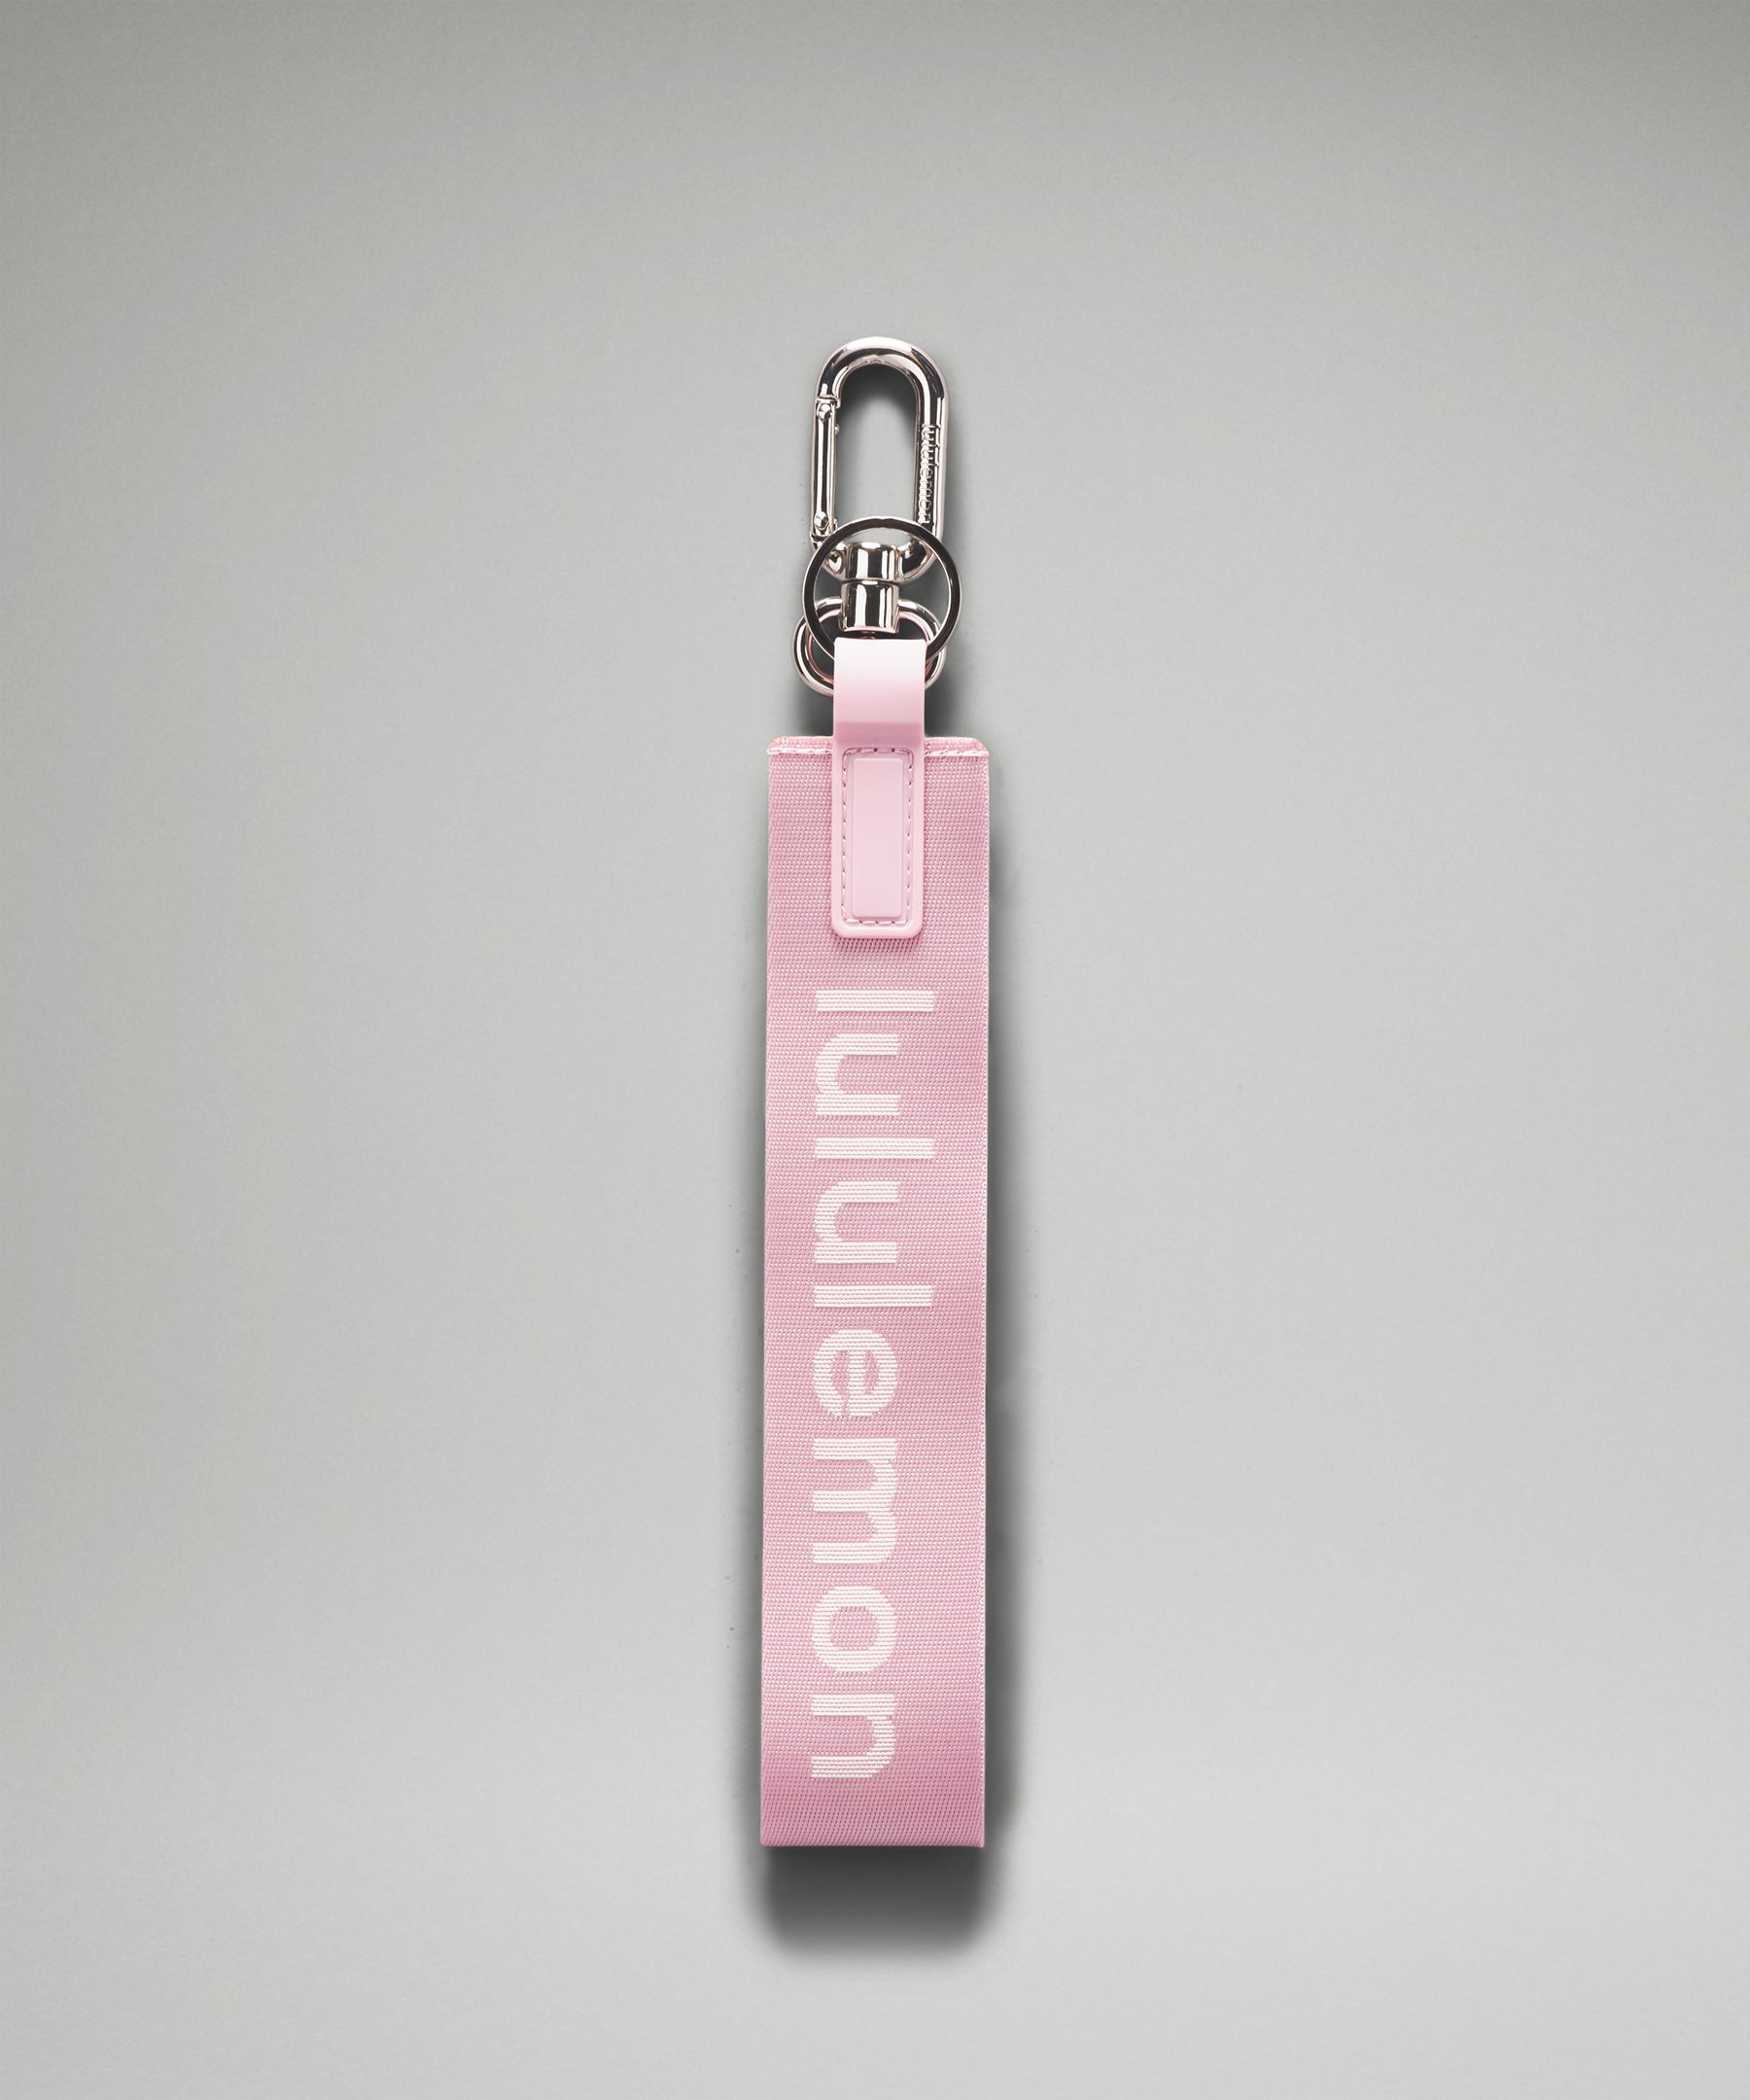 Lululemon's new Neverlost keychain in Love red/Sonic pink. This thing